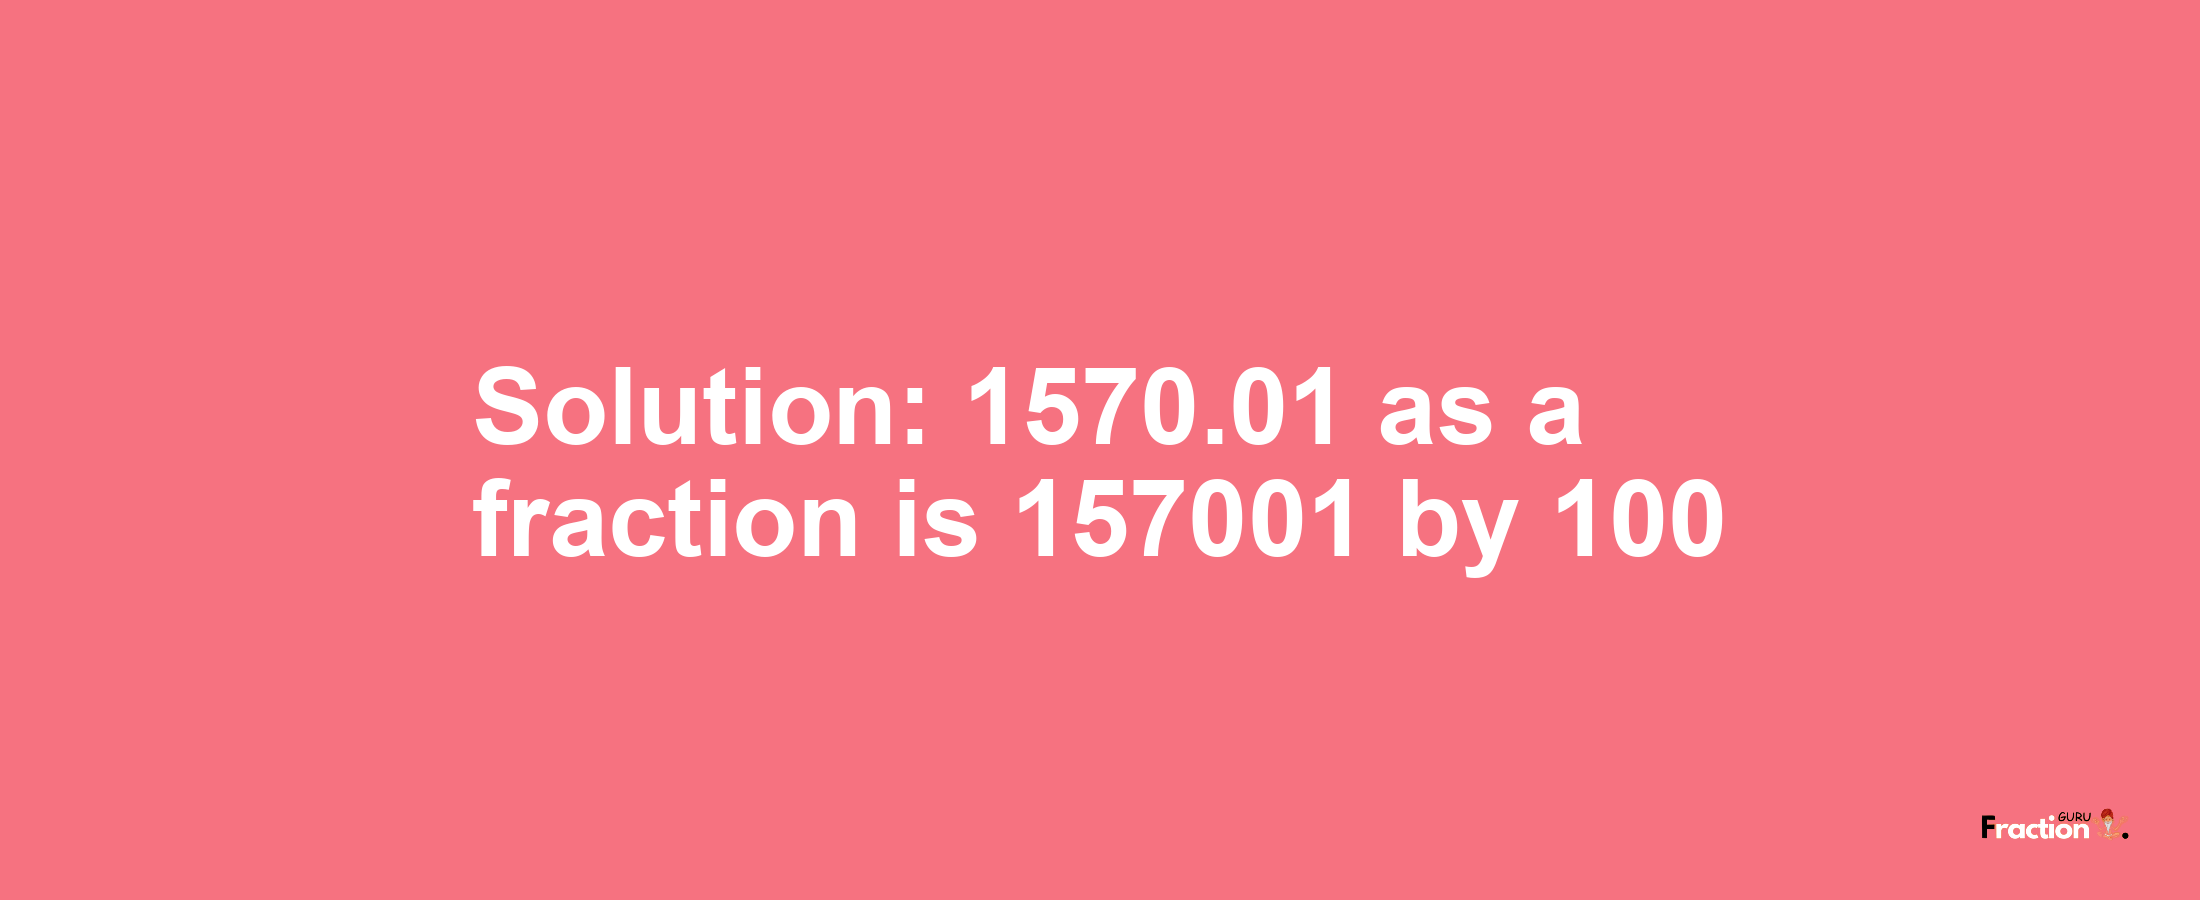 Solution:1570.01 as a fraction is 157001/100